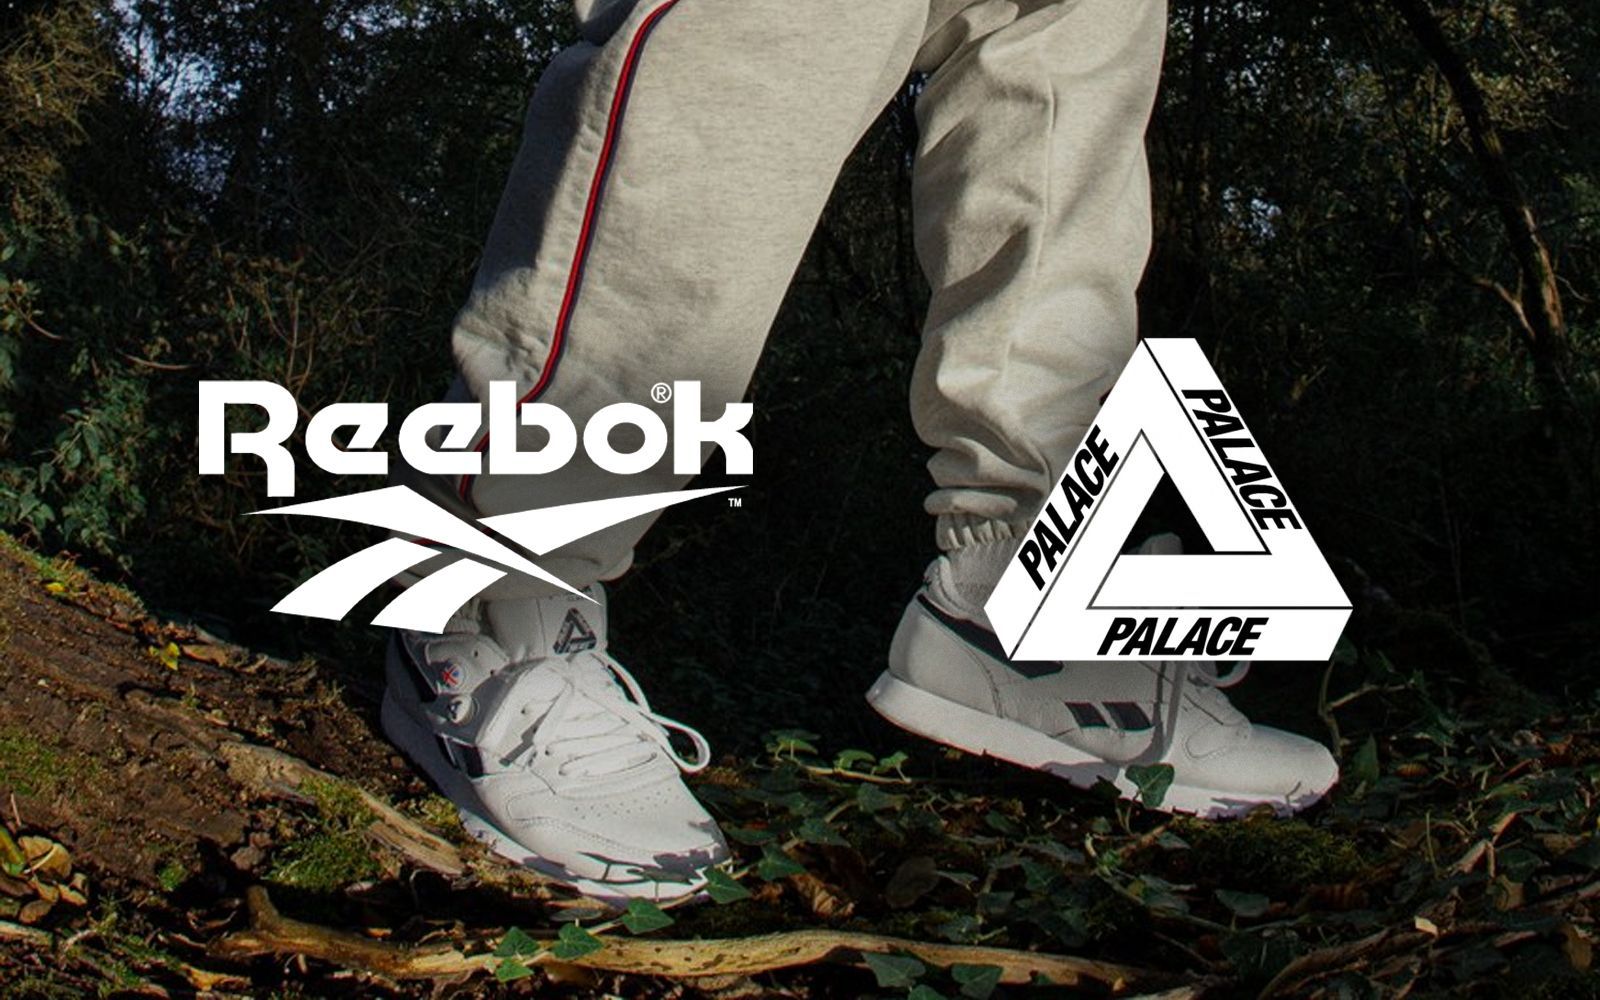 the Reebok Classic Leather Pump